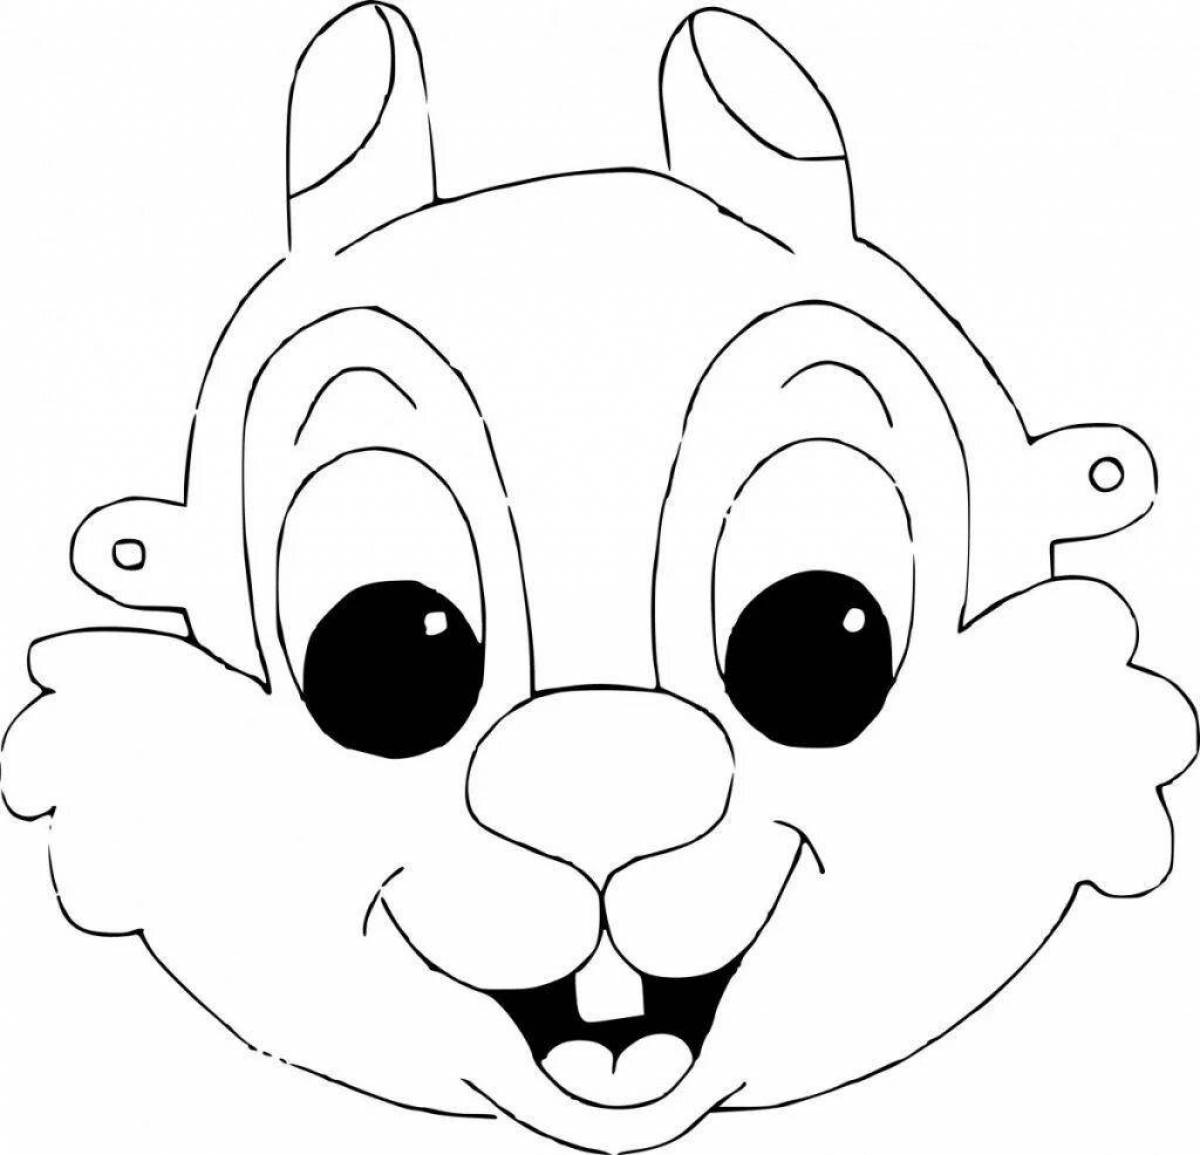 Adorable animal coloring page